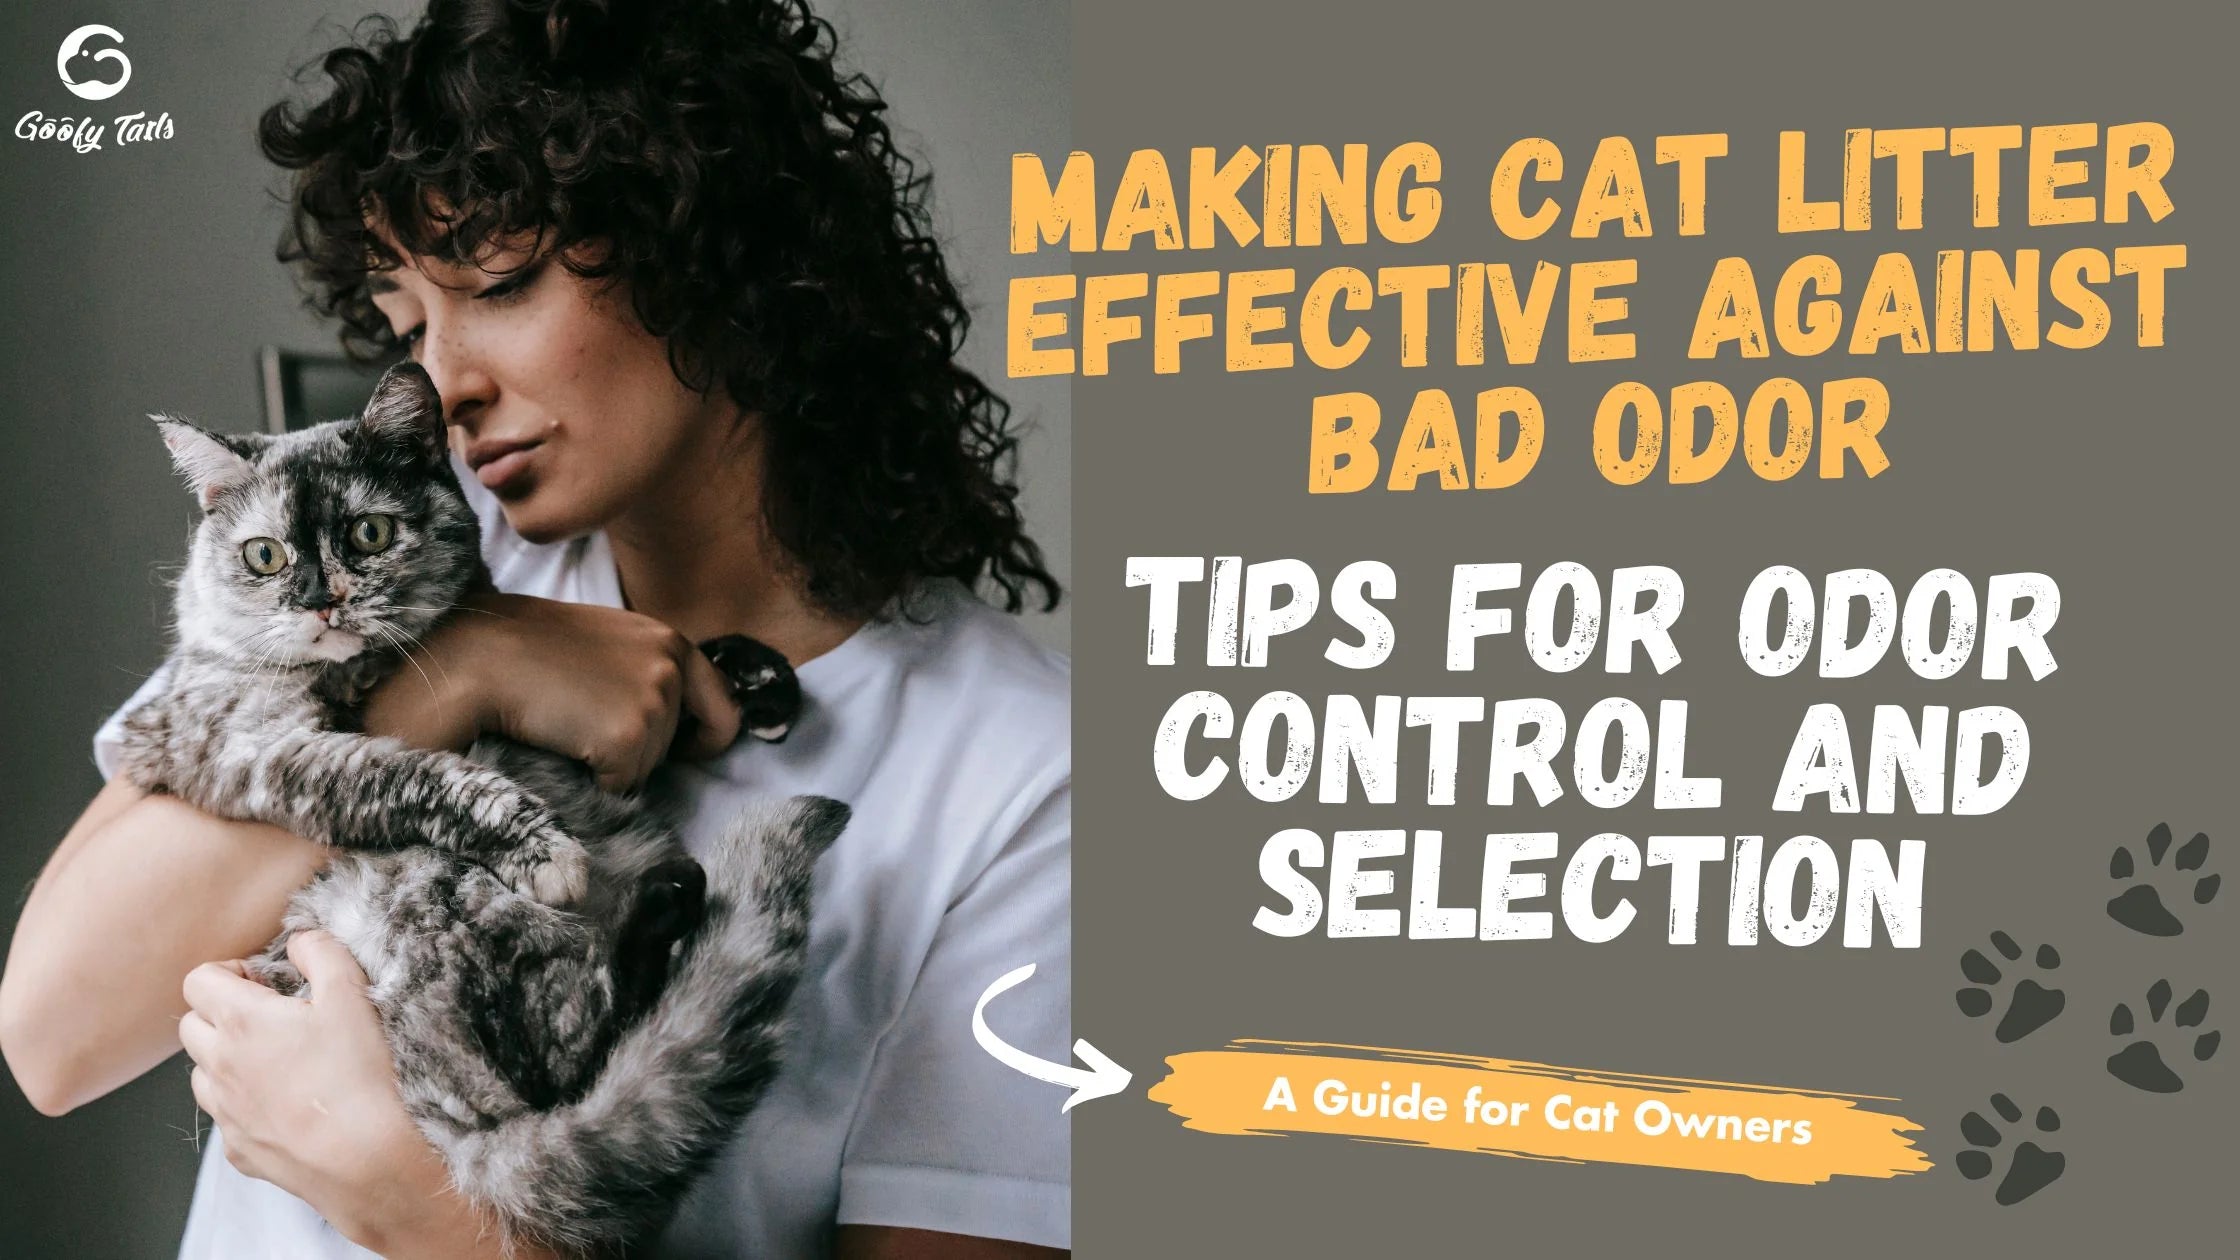 Making Cat Litter Effective Against Bad Odor: Tips for Odor Control and Selection